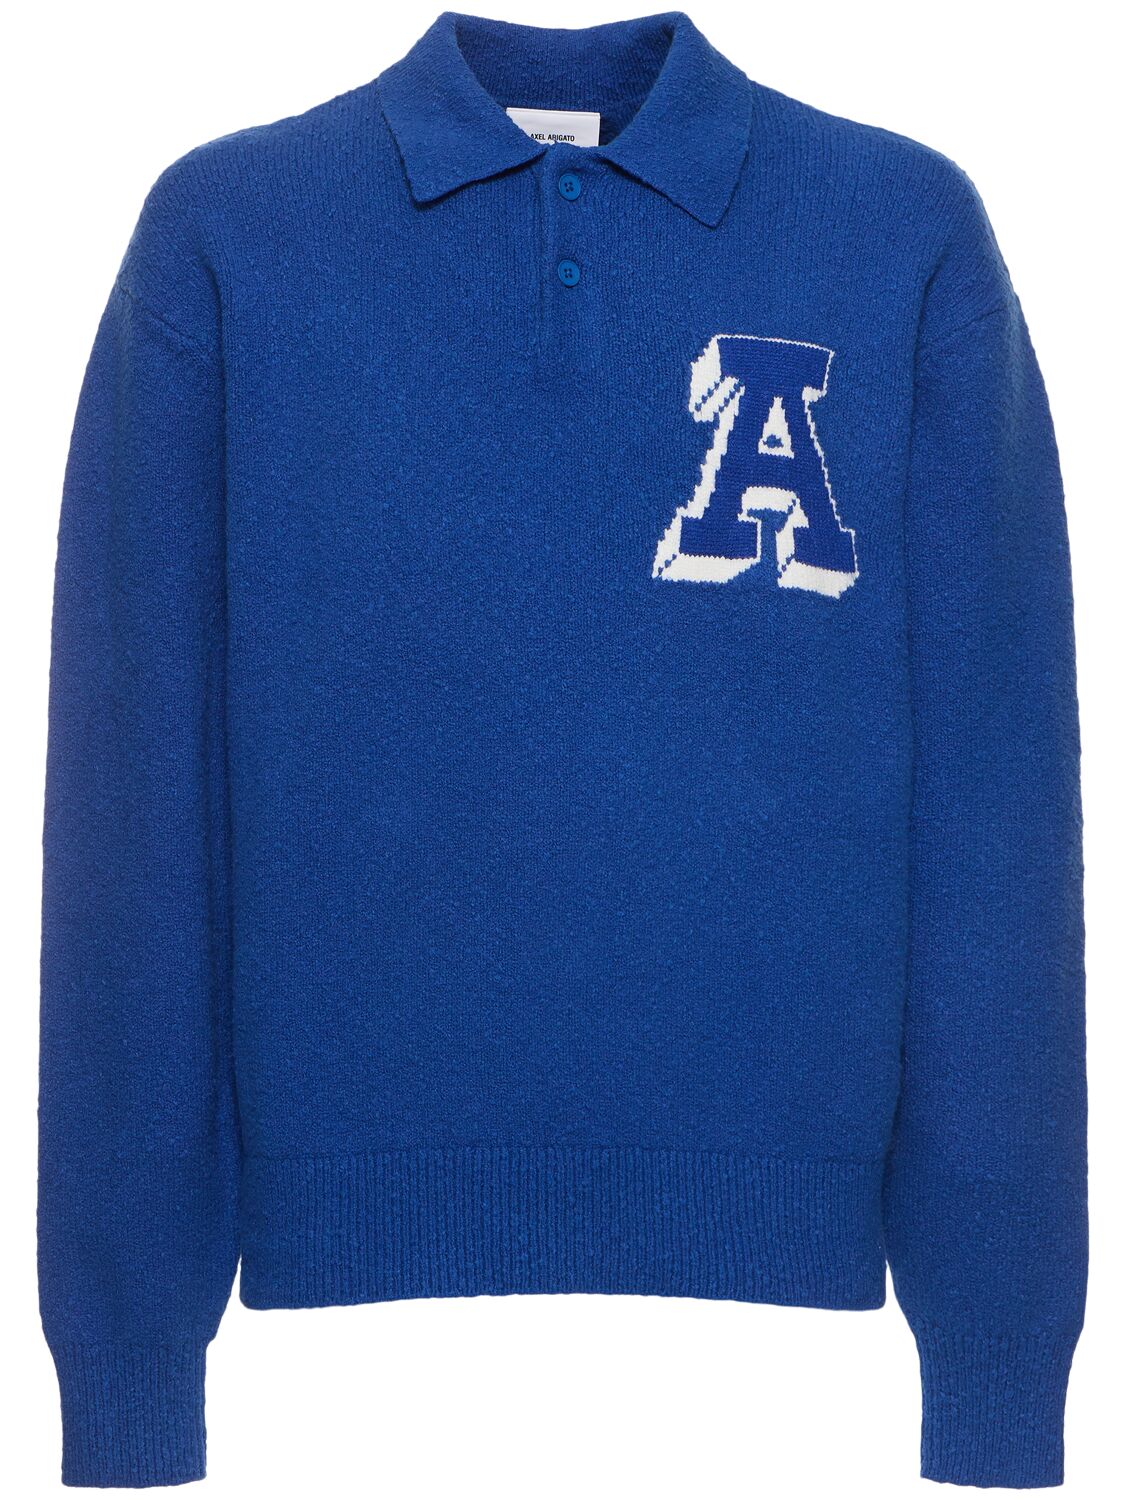 Team Polo Cotton Blend Sweater